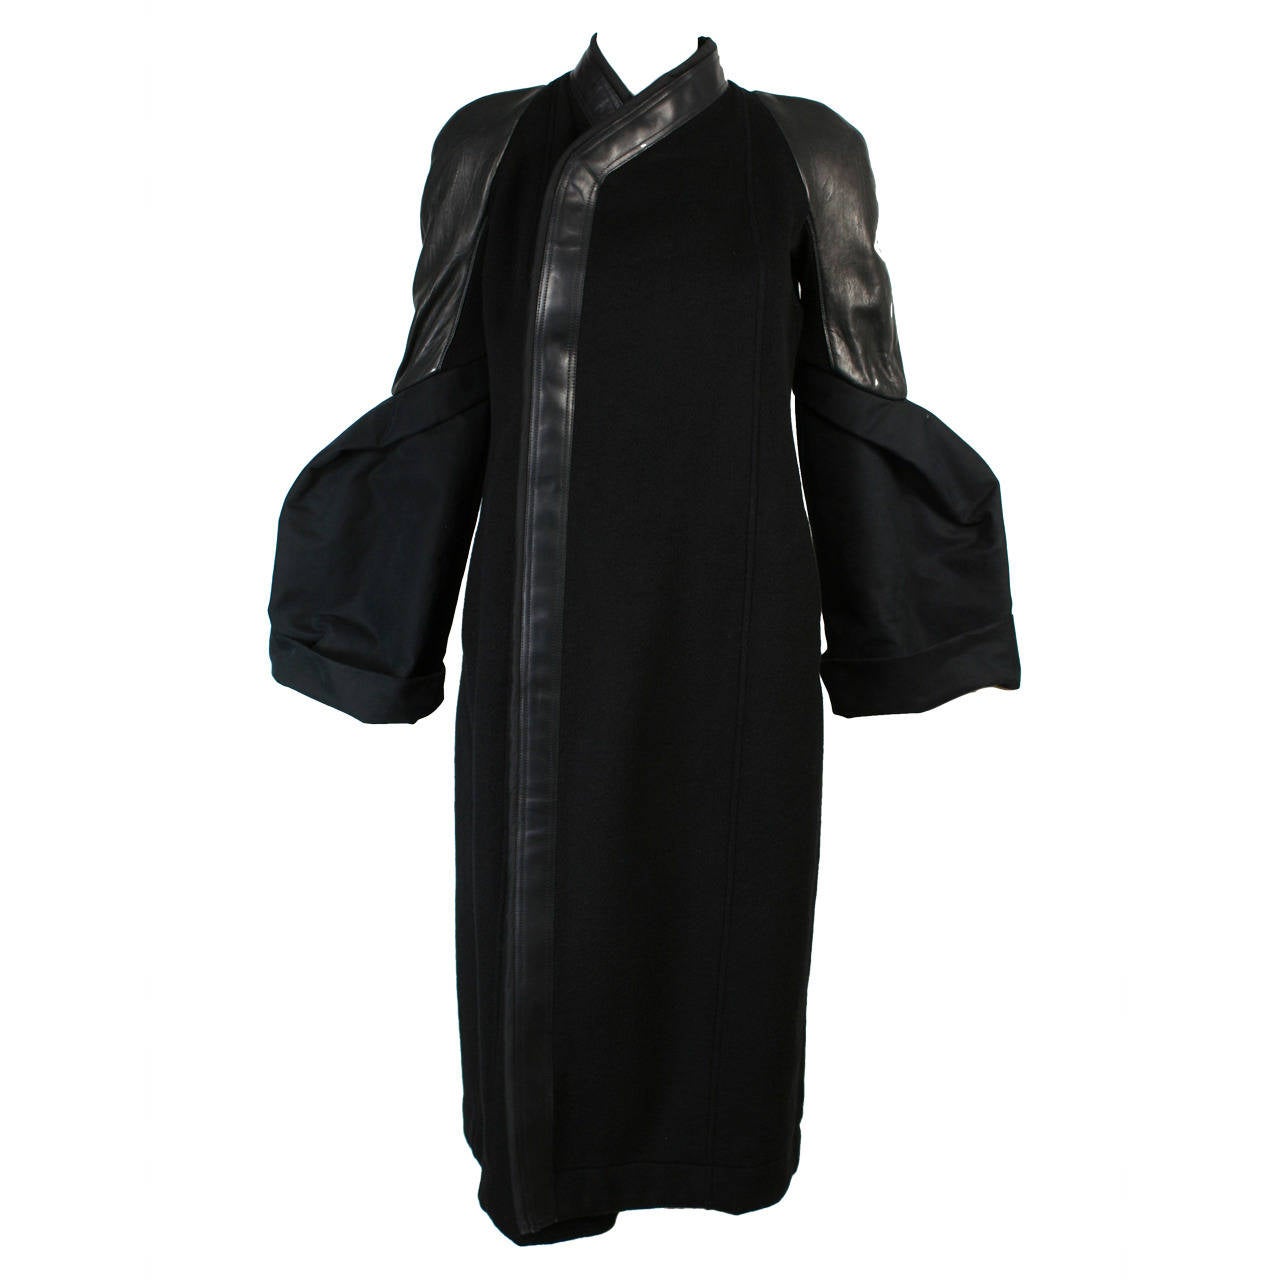 Magnificent Rick Owens Sculptural Black Cashmere and Leather Coat New With Tags For Sale